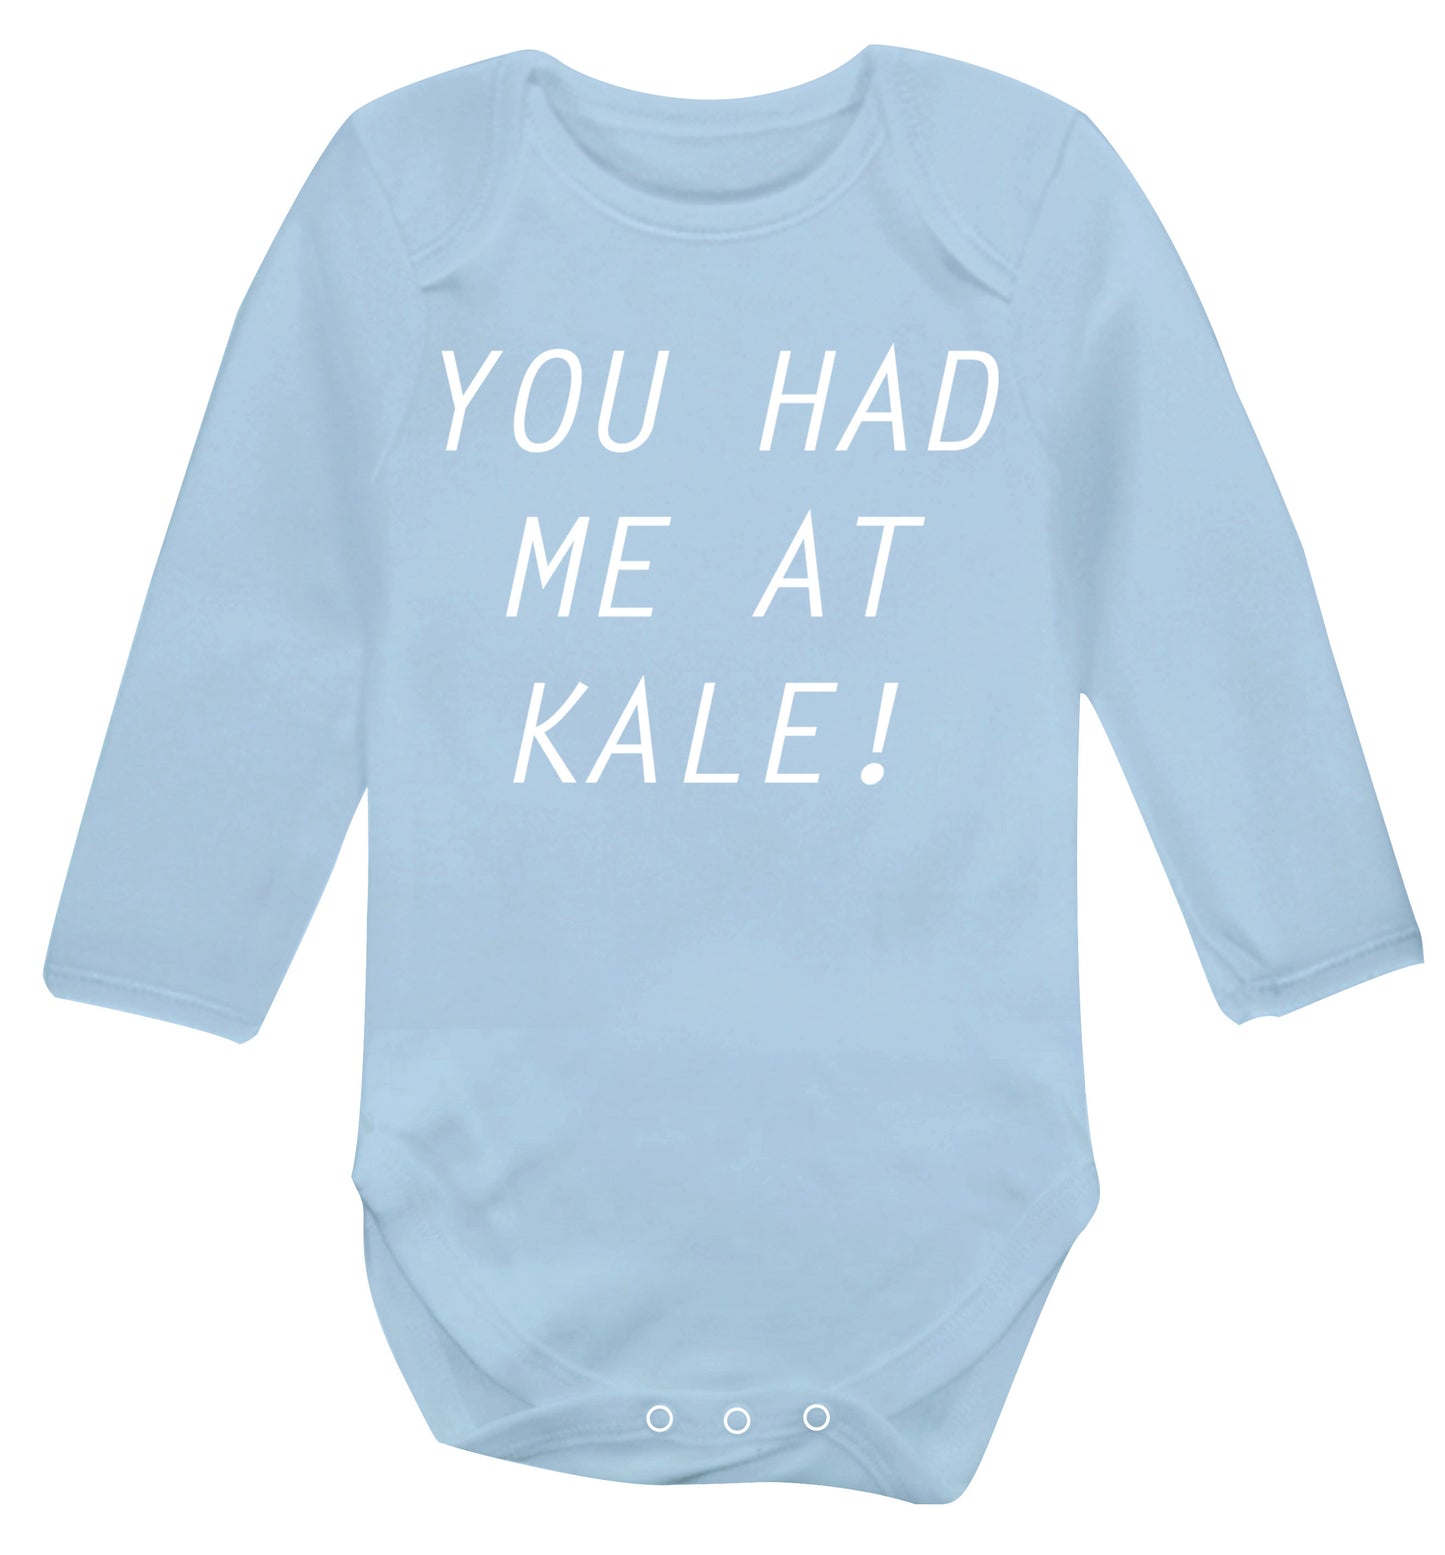 You had me at kale Baby Vest long sleeved pale blue 6-12 months